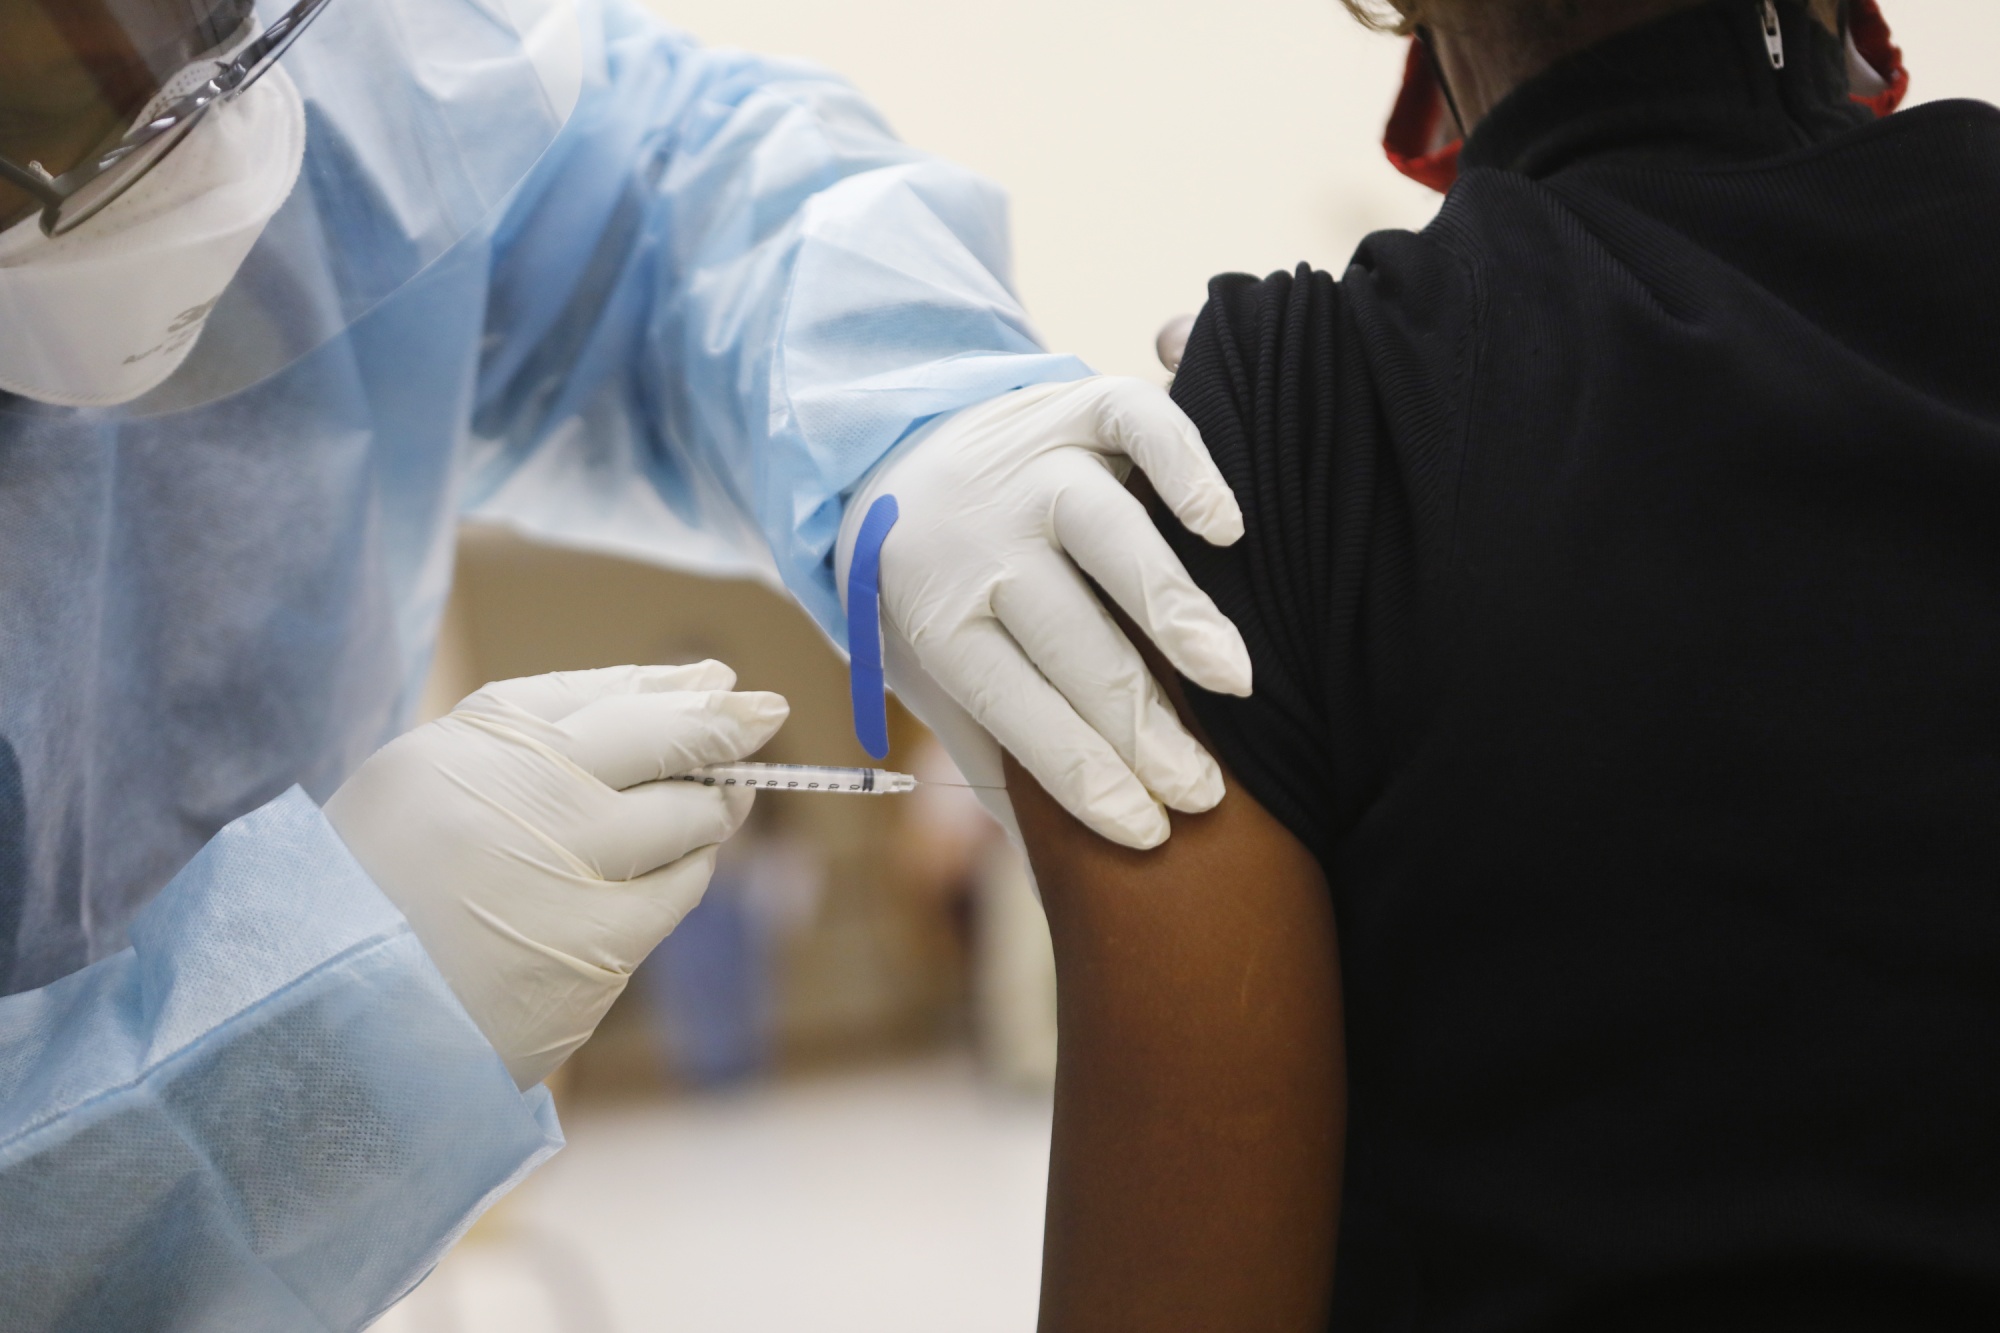 Only a handful of U.S. states had Covid-19 vaccination&nbsp;rollout plans that took into account the disadvantages that minority populations face&nbsp;in the health-care system.